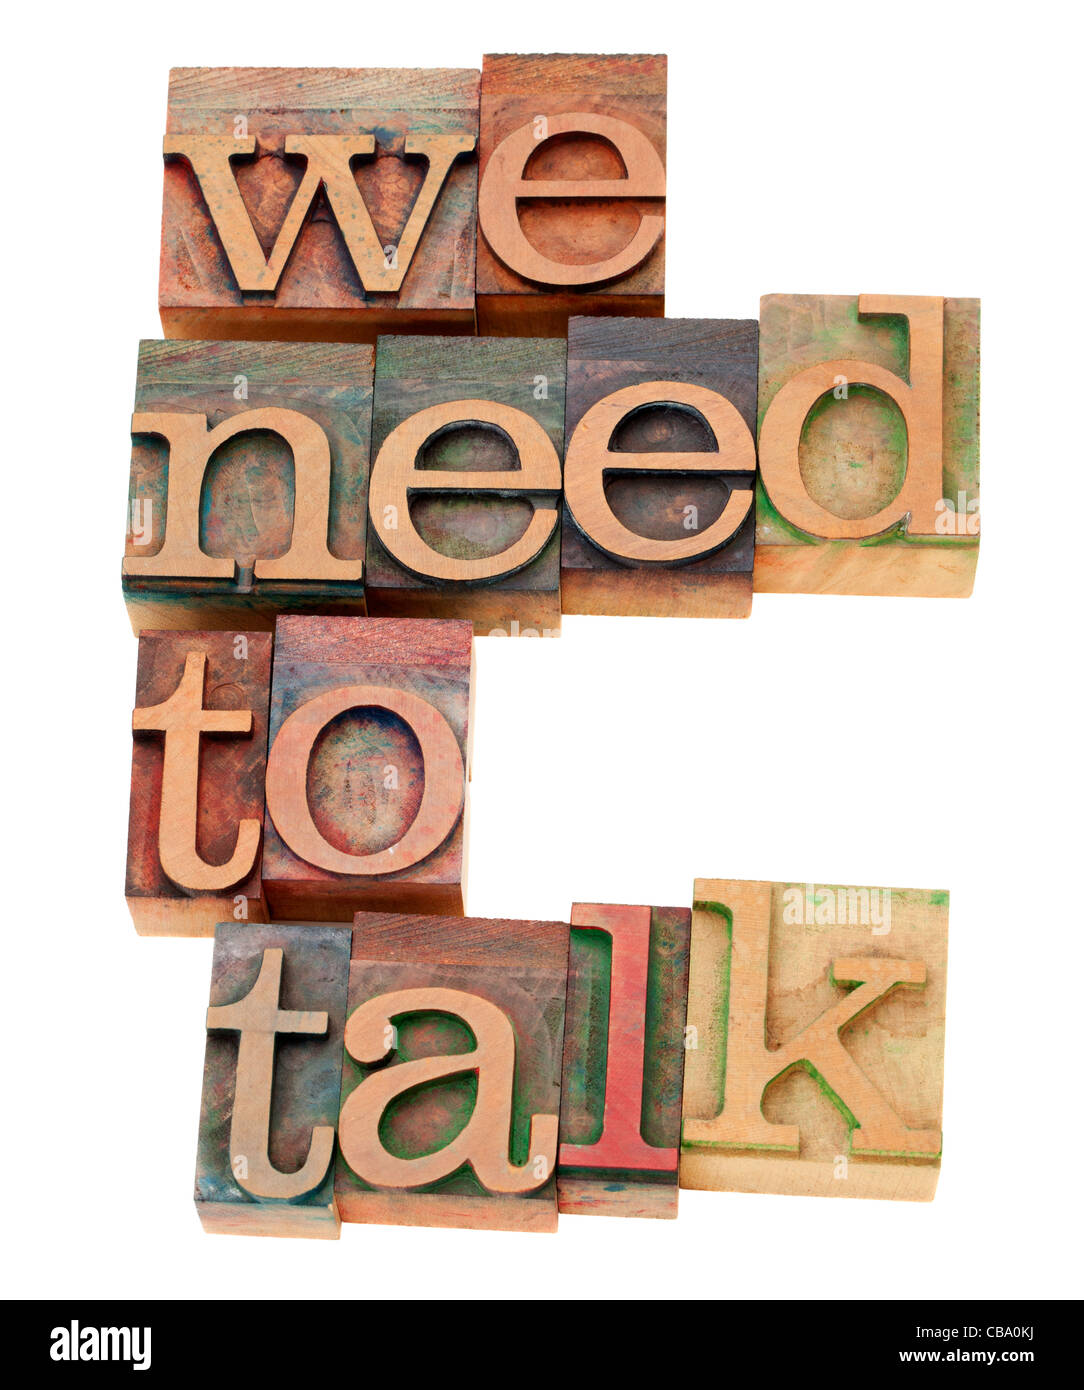 we need to talk request - isolated text in vintage wood letterpress printing blocks Stock Photo